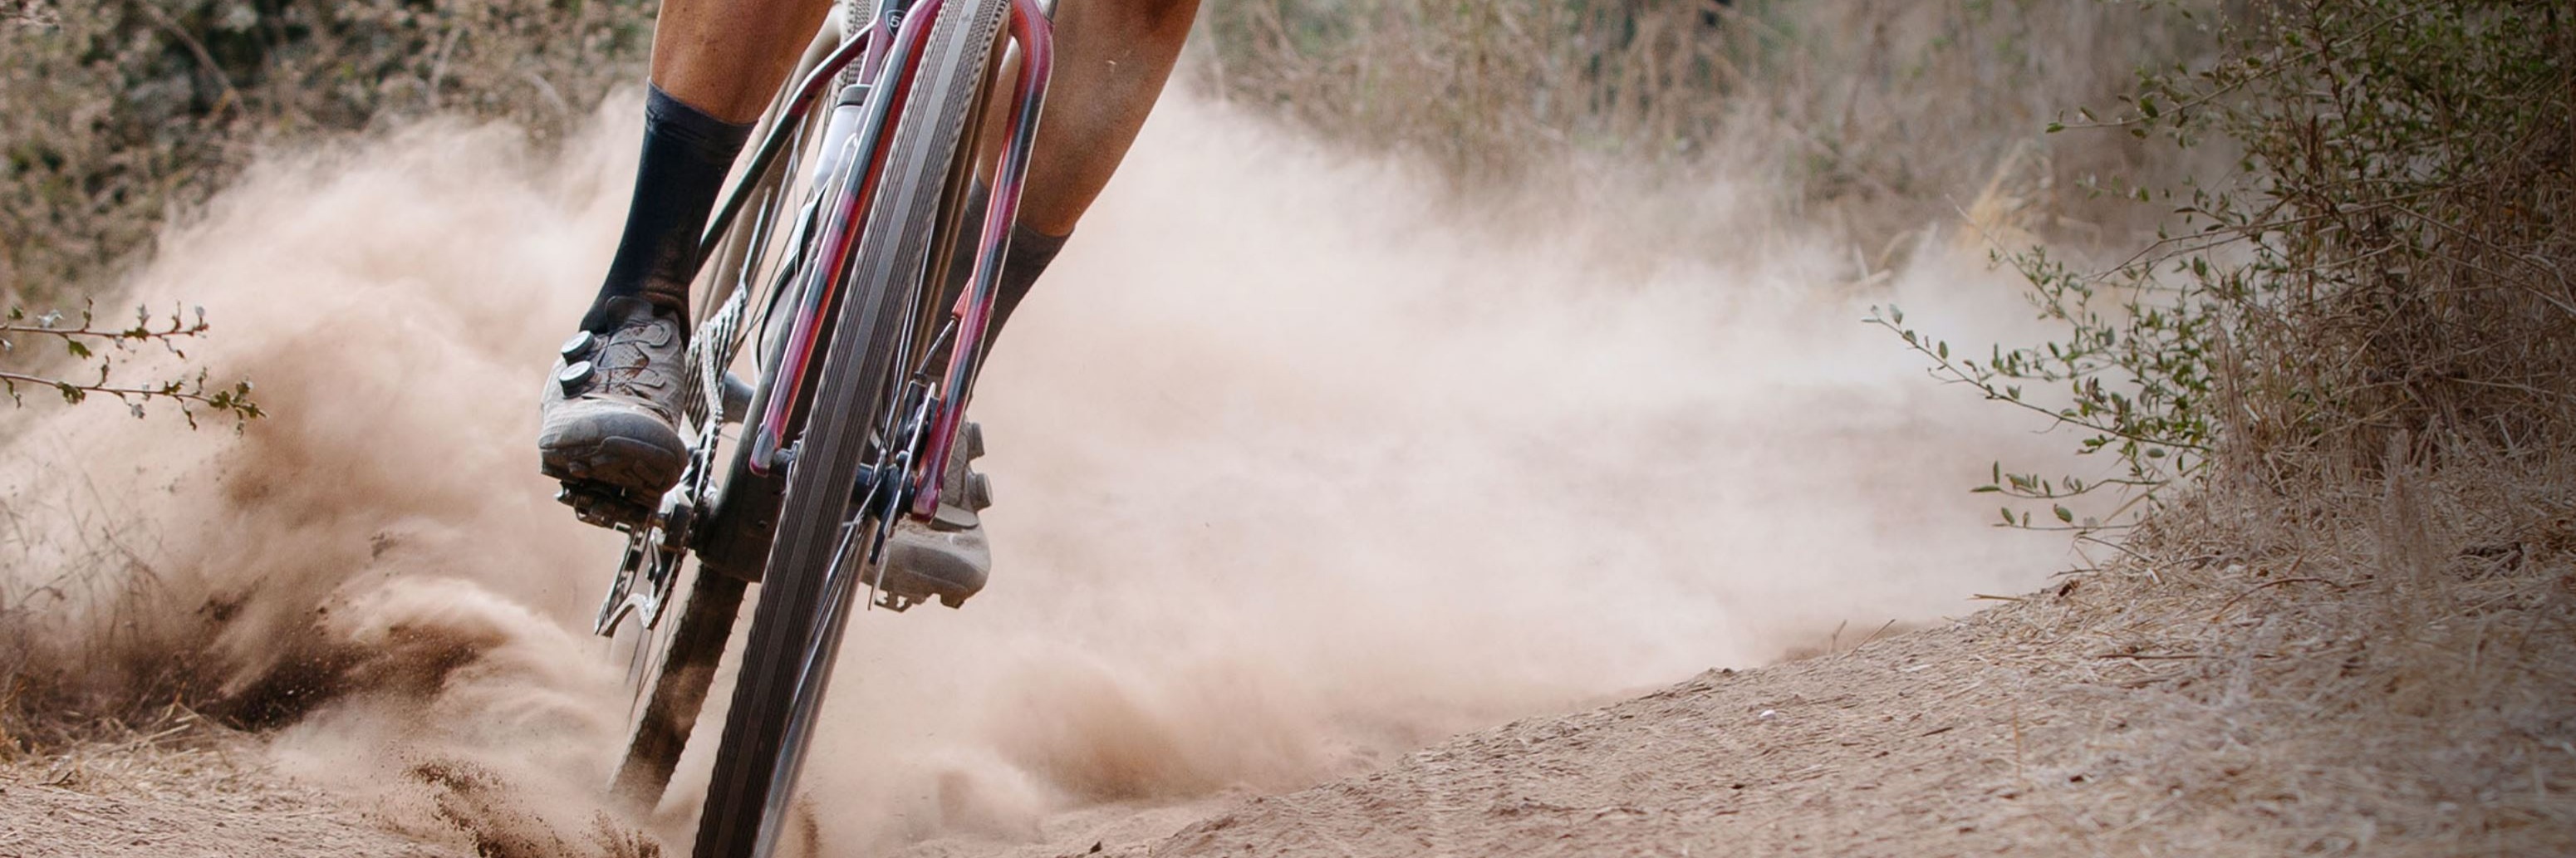 Learn more about gravel bikes